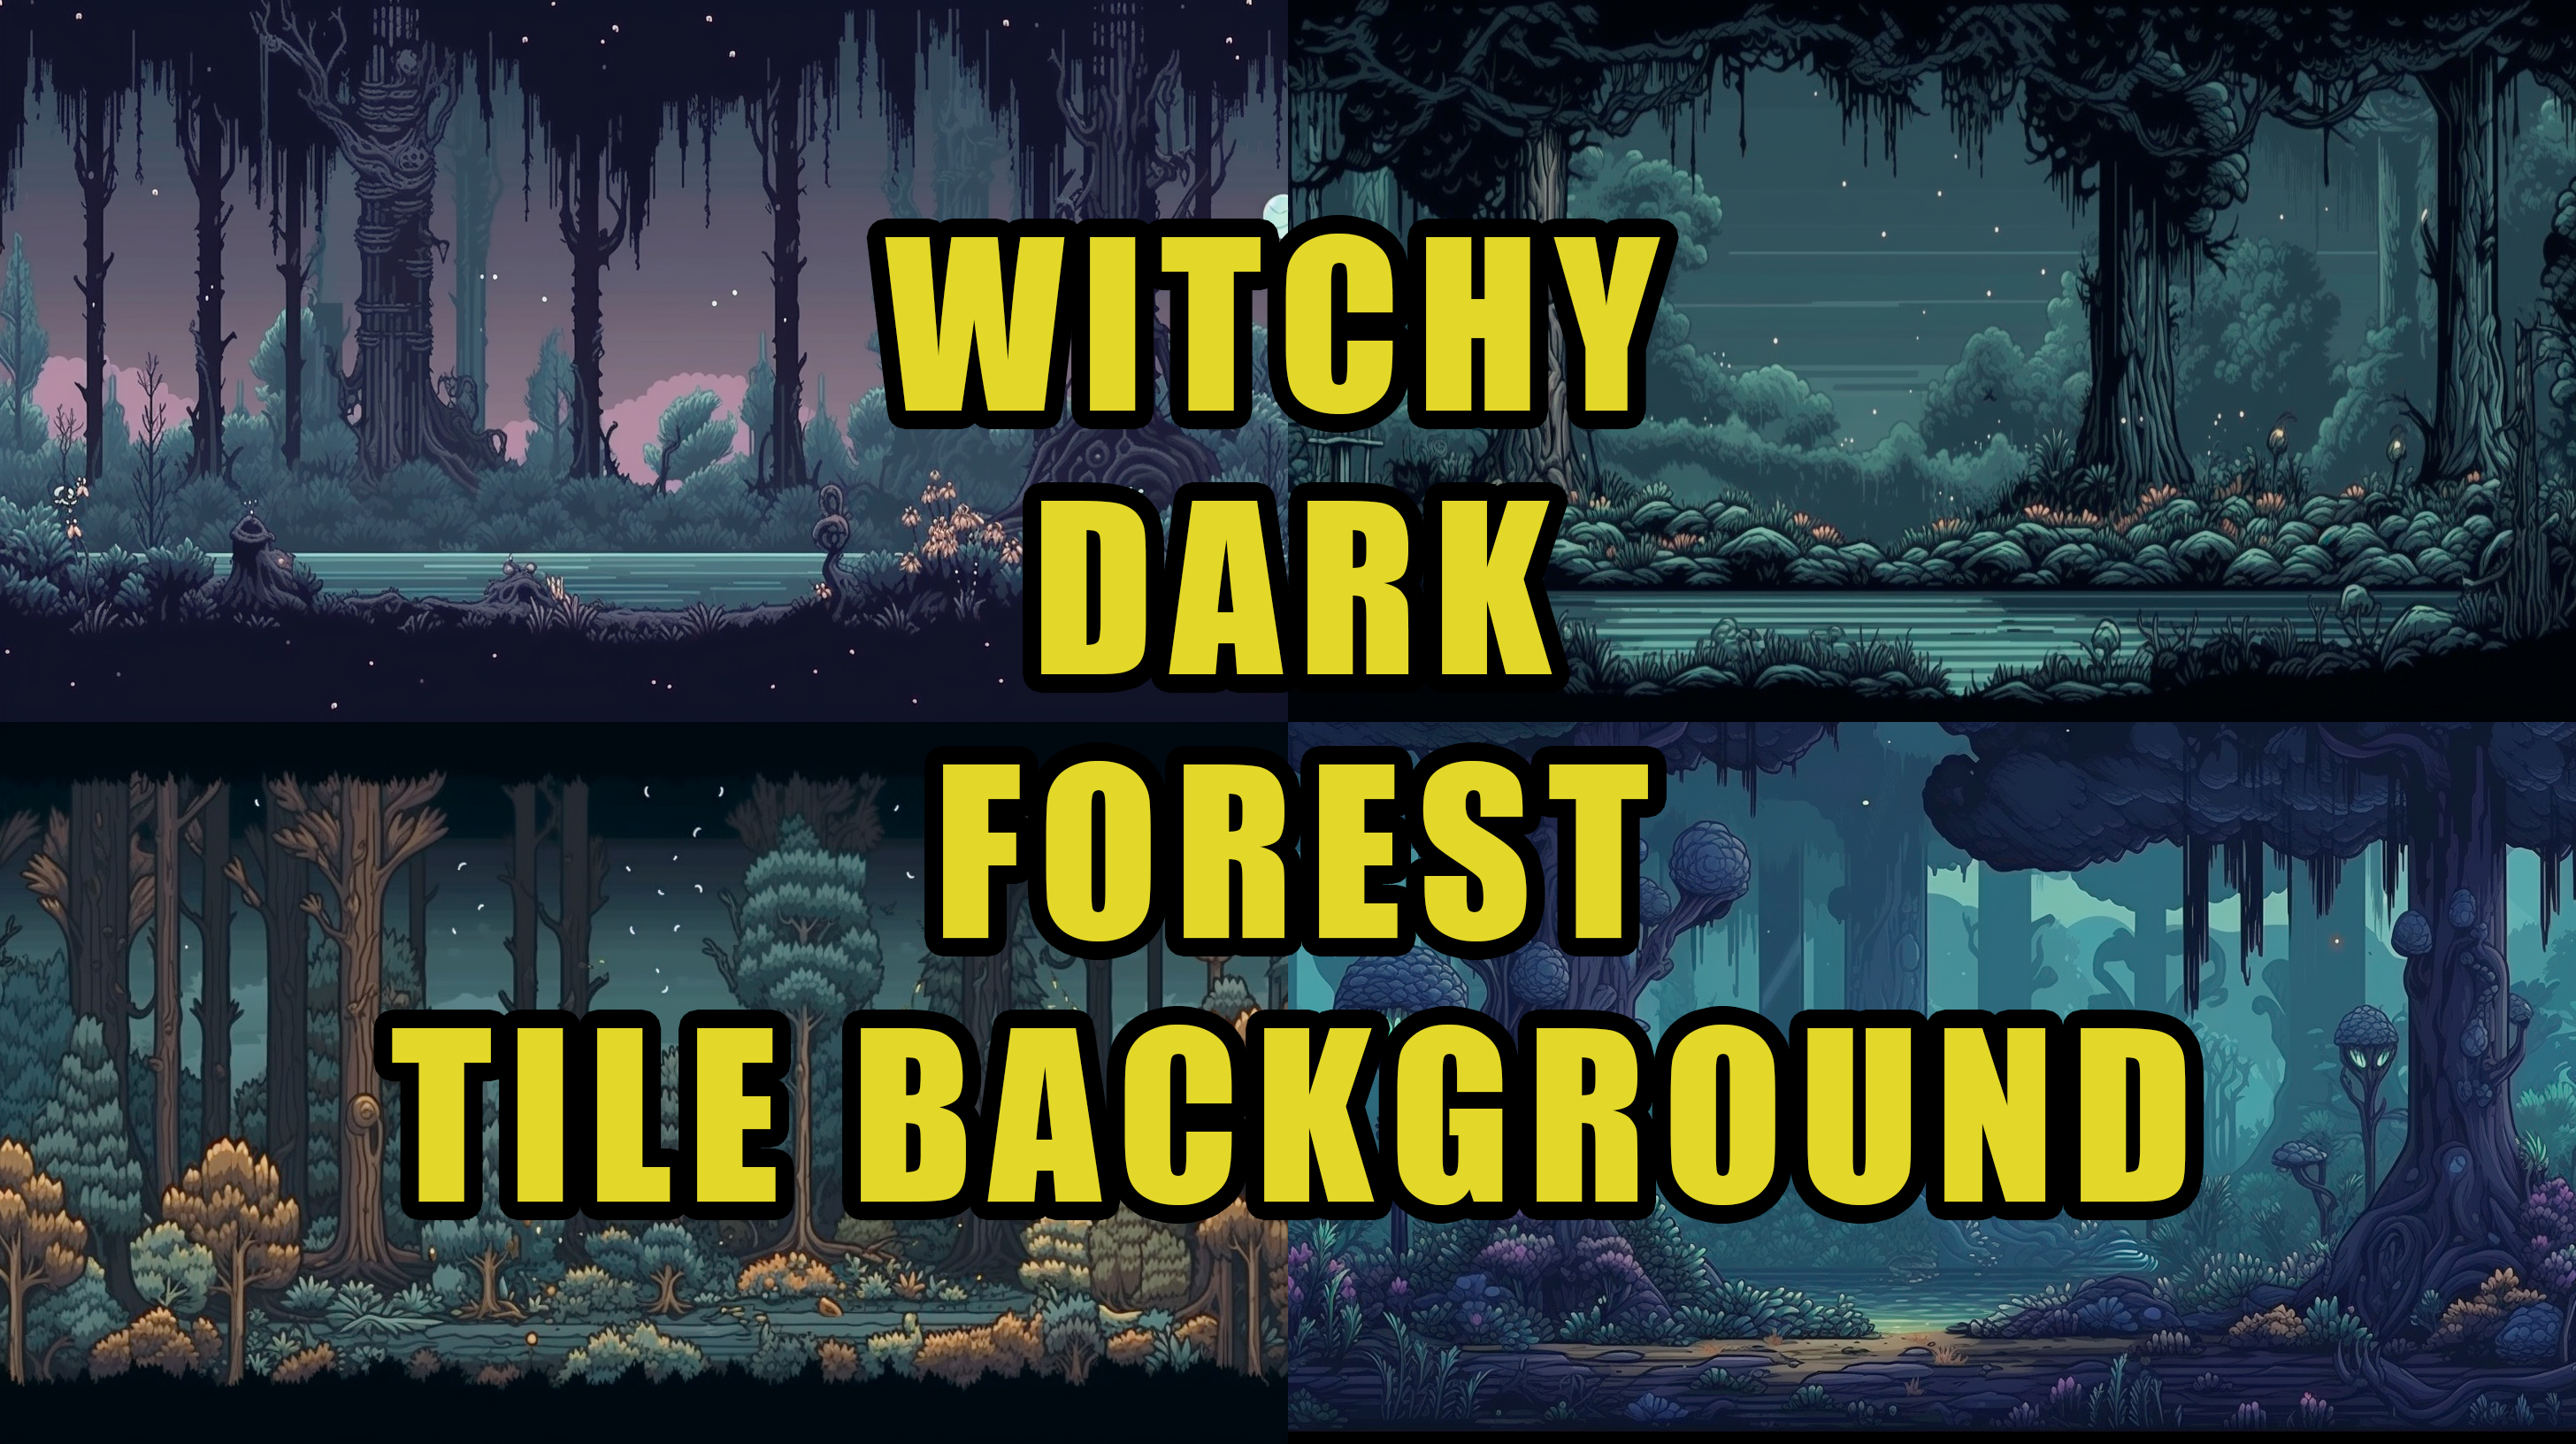 Witchy Dark Forest Tile Background